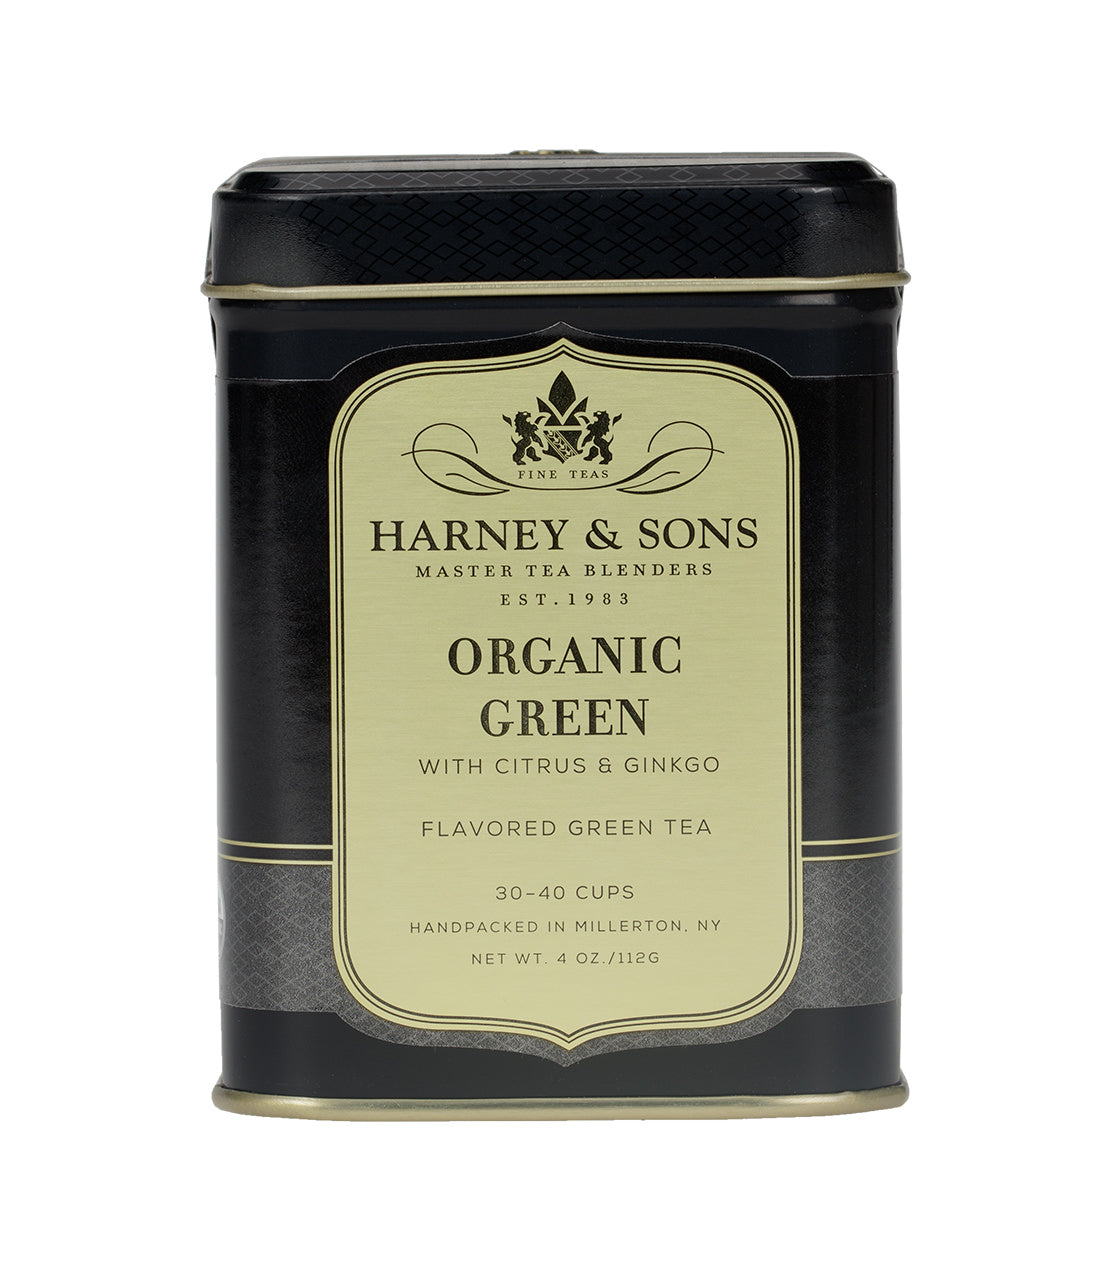 Organic Green with Citrus & Ginkgo - Loose 4 oz. Tin - Harney & Sons Fine Teas